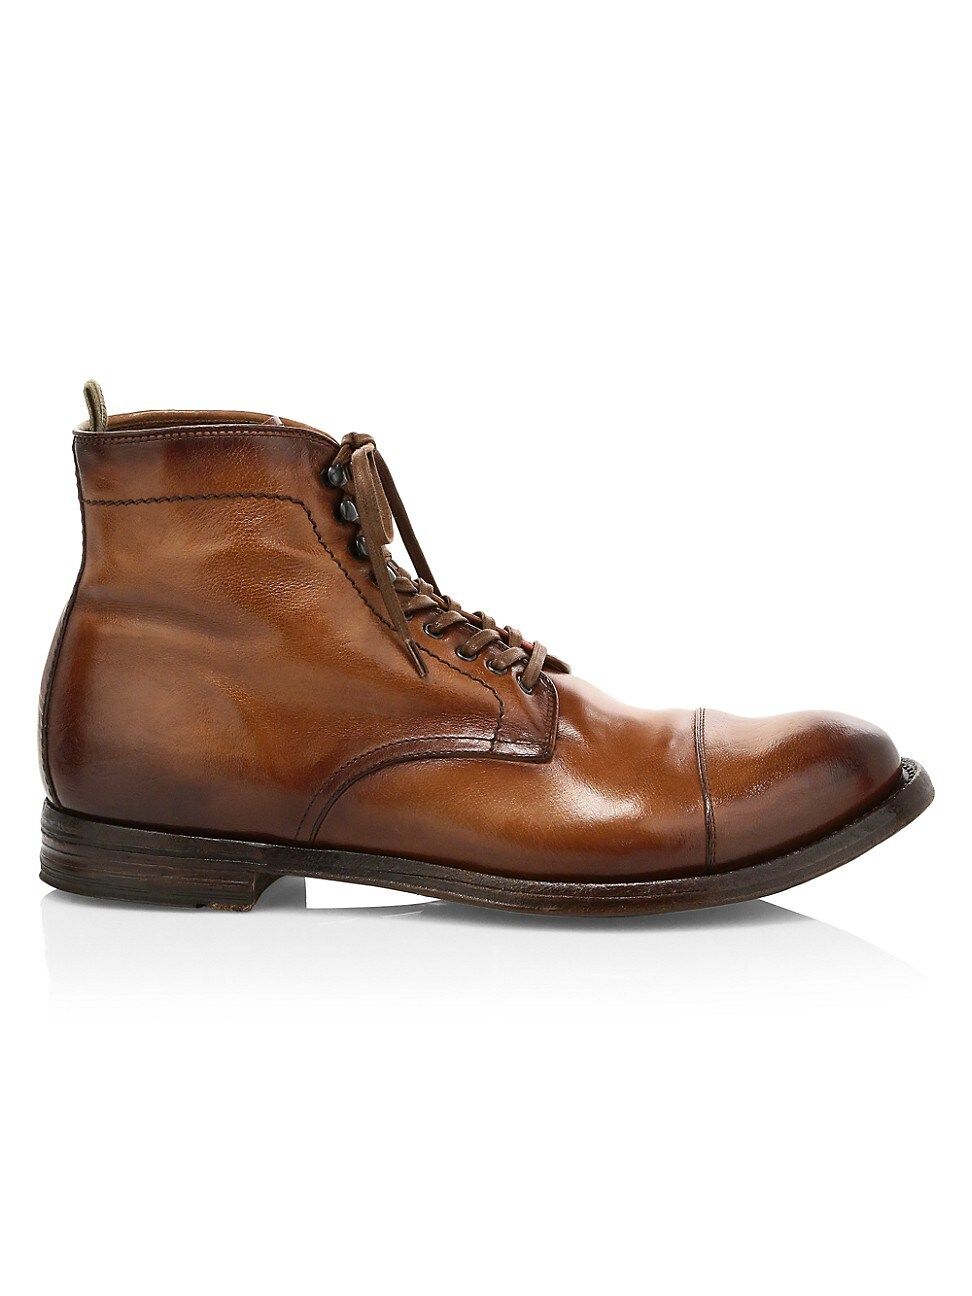 Officine Creative Men's Anatomia Lace-Up Leather Boots - Buffalo - Size 42 (9) | Saks Fifth Avenue